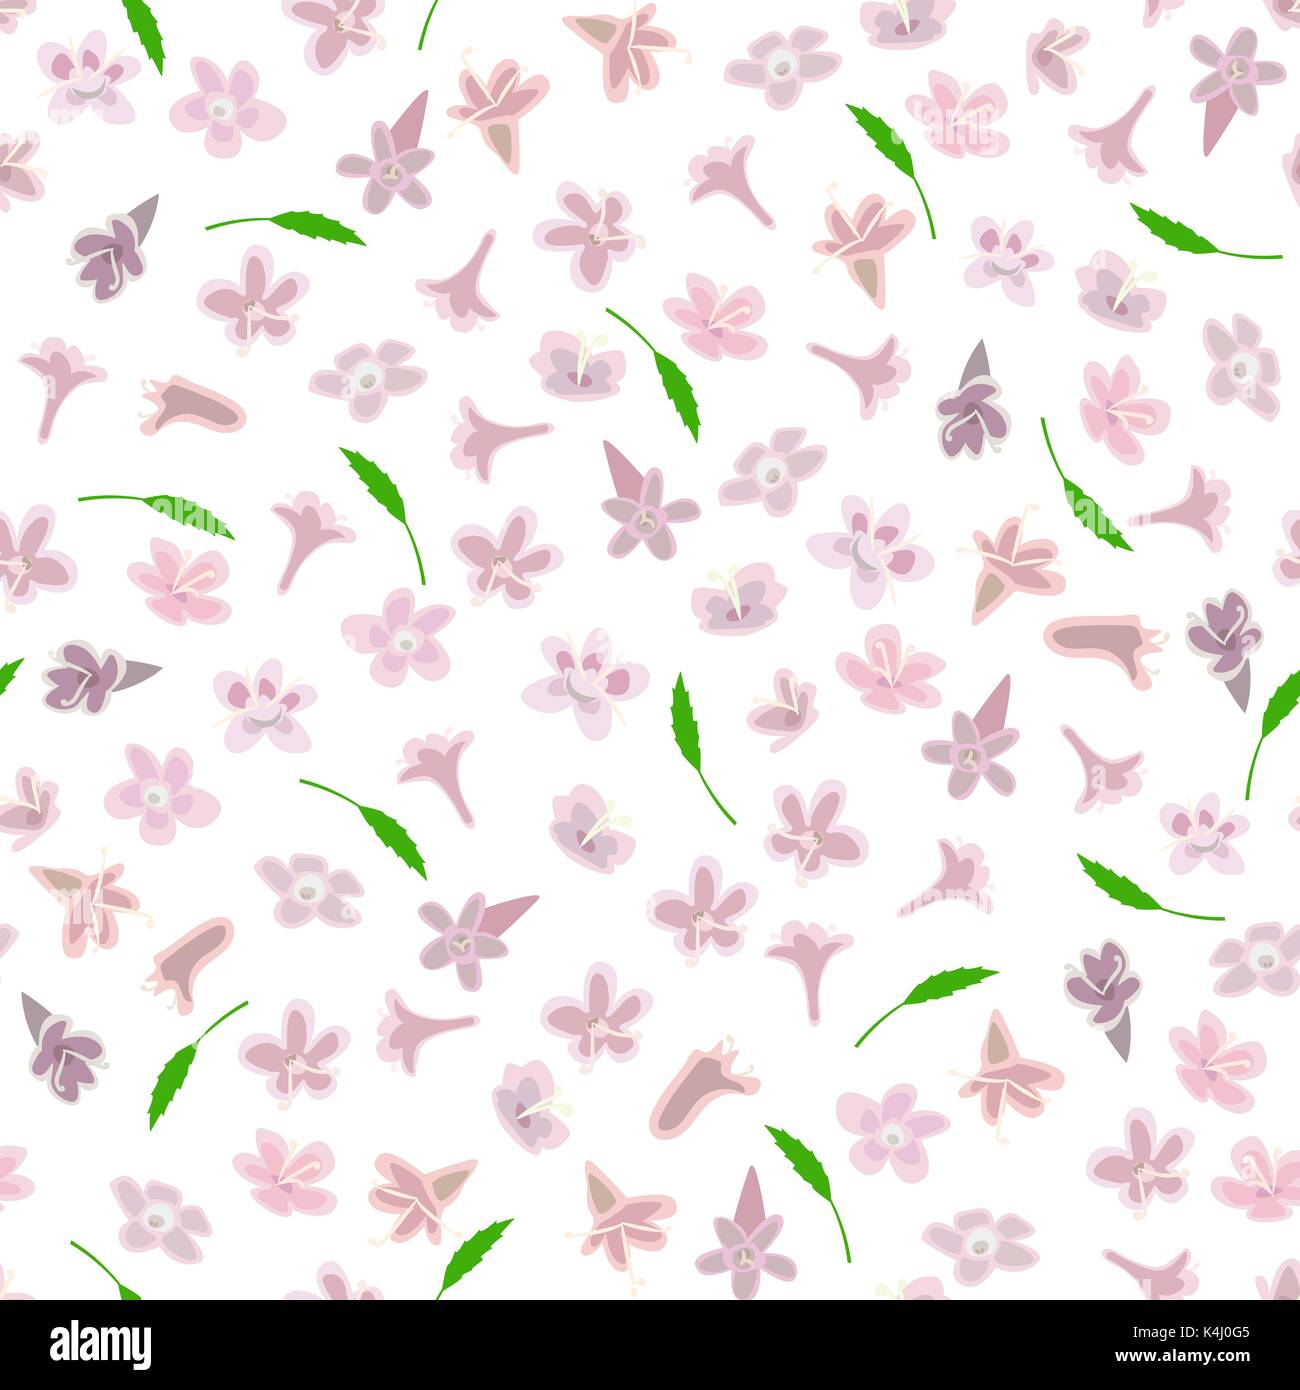 Simple cute pattern in small-scale pink flowers Stock Vector